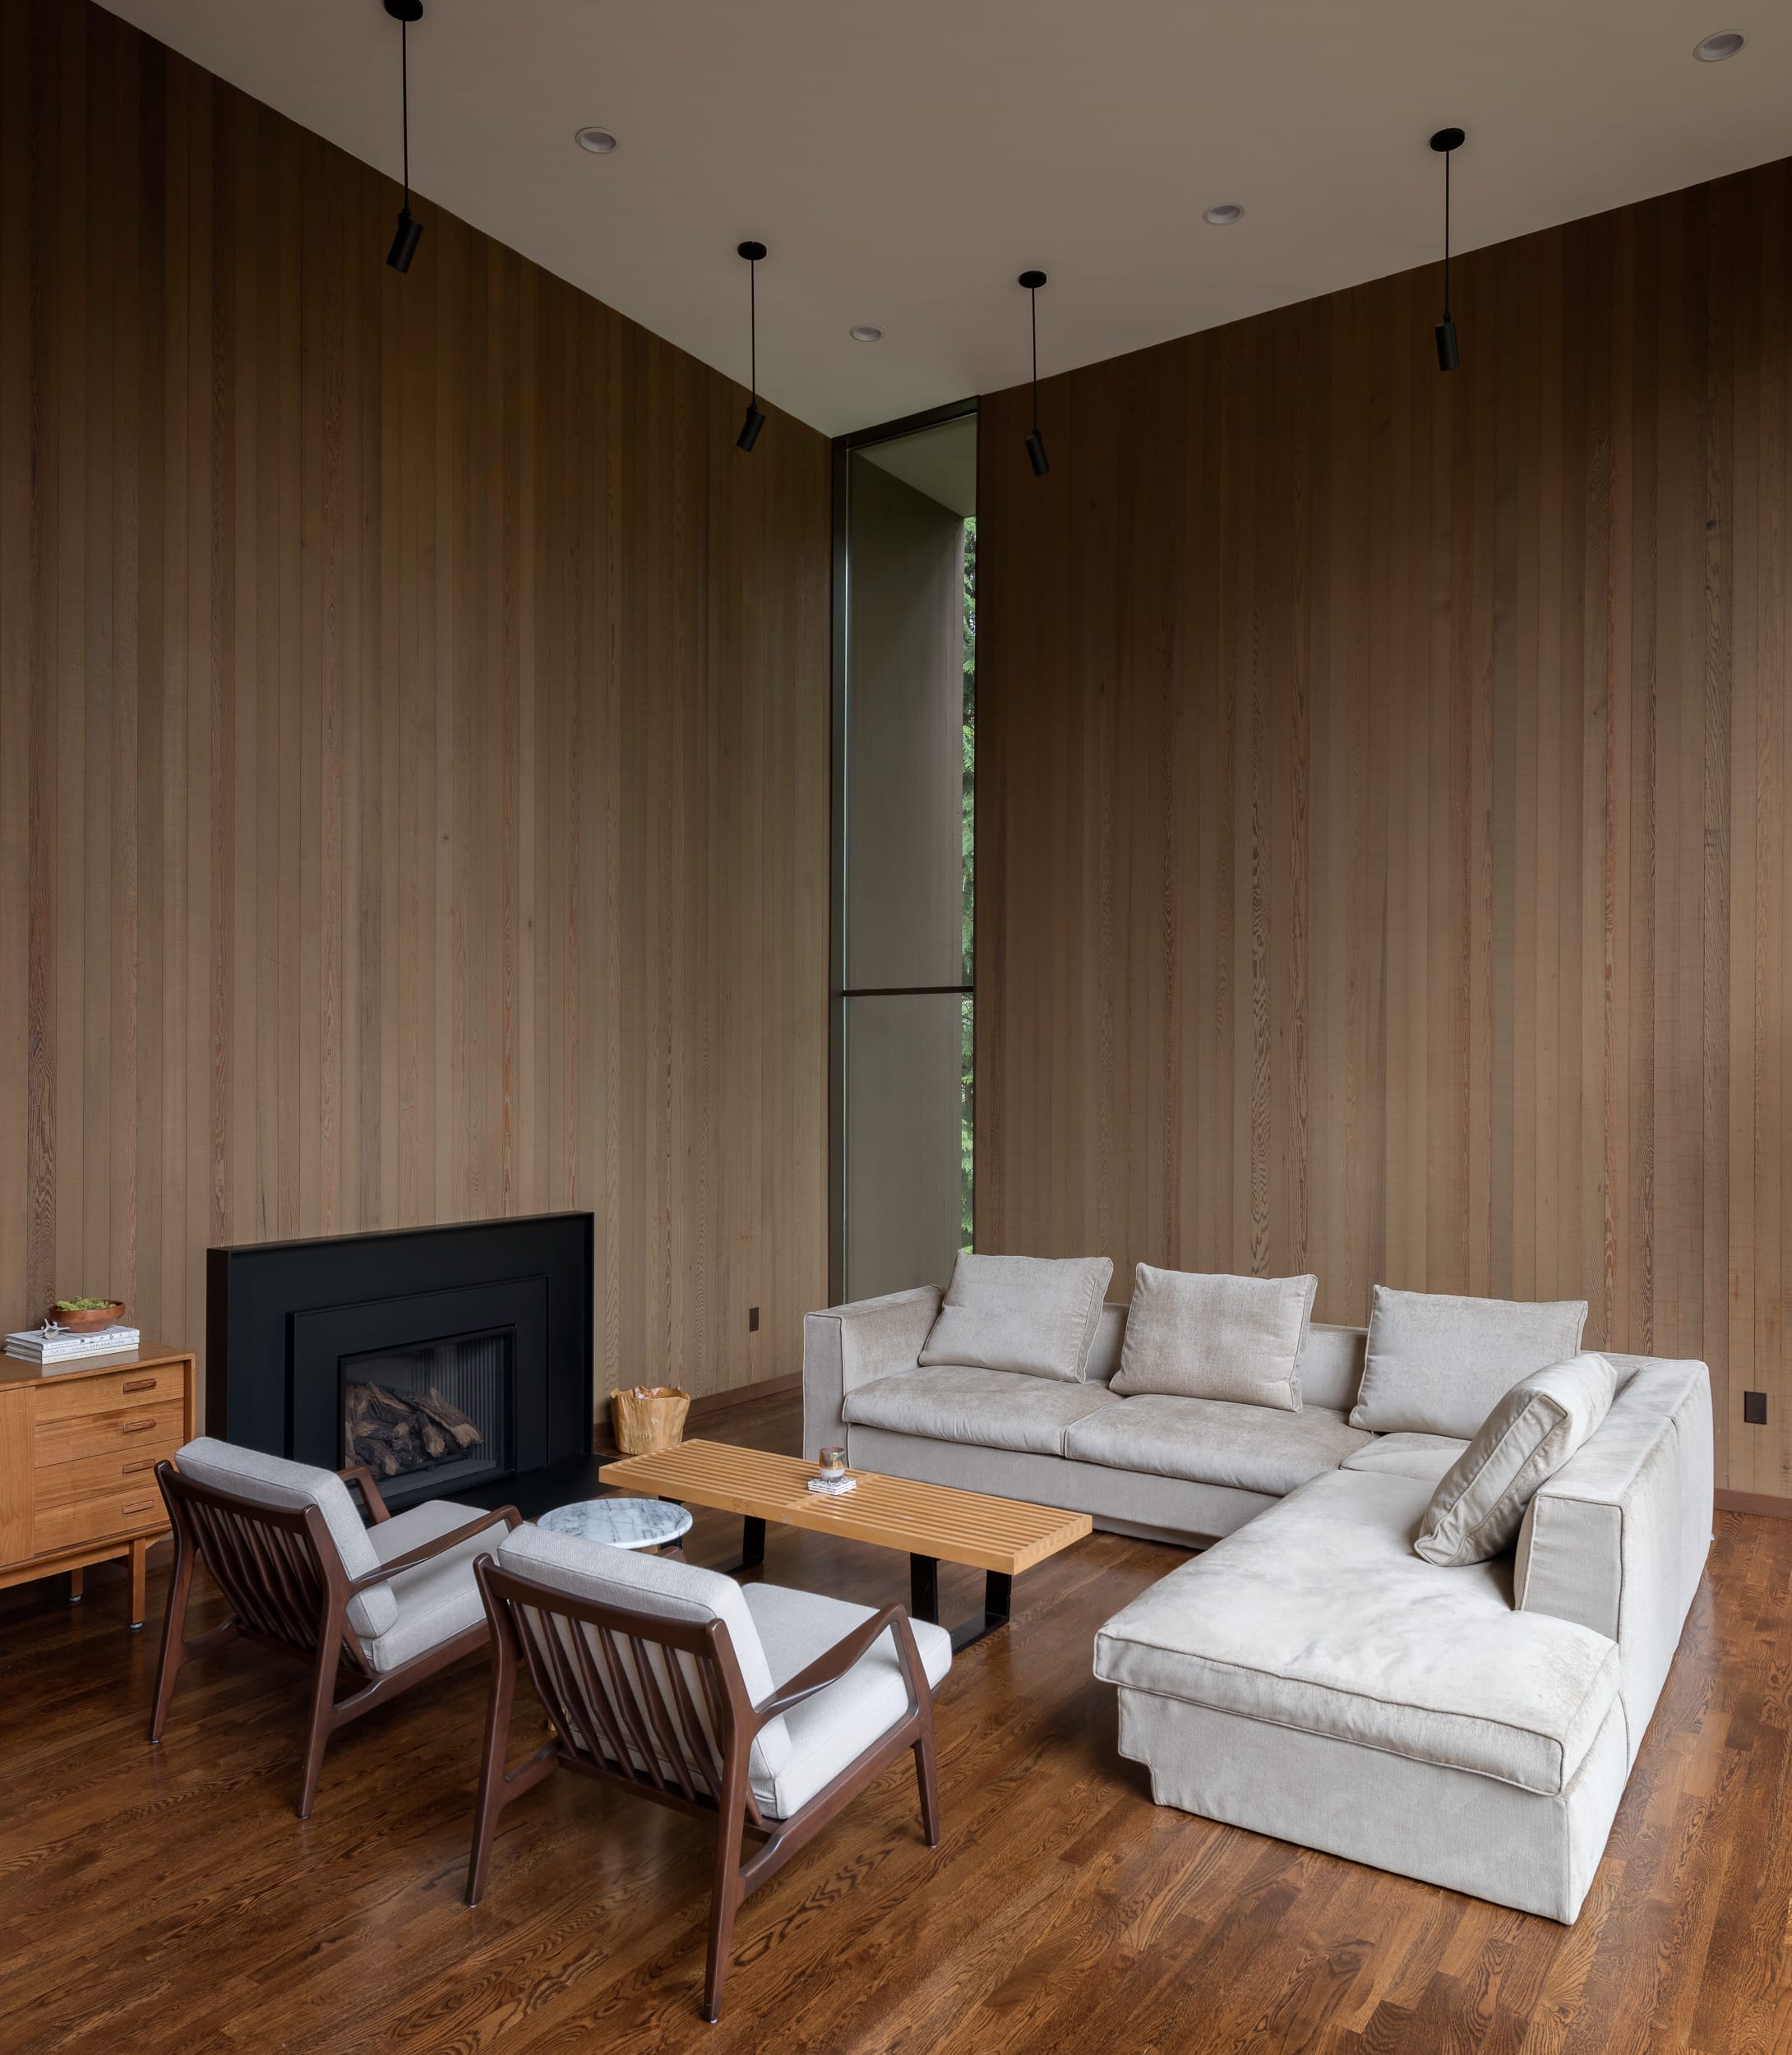 A living room with wooden walls and a fireplace.